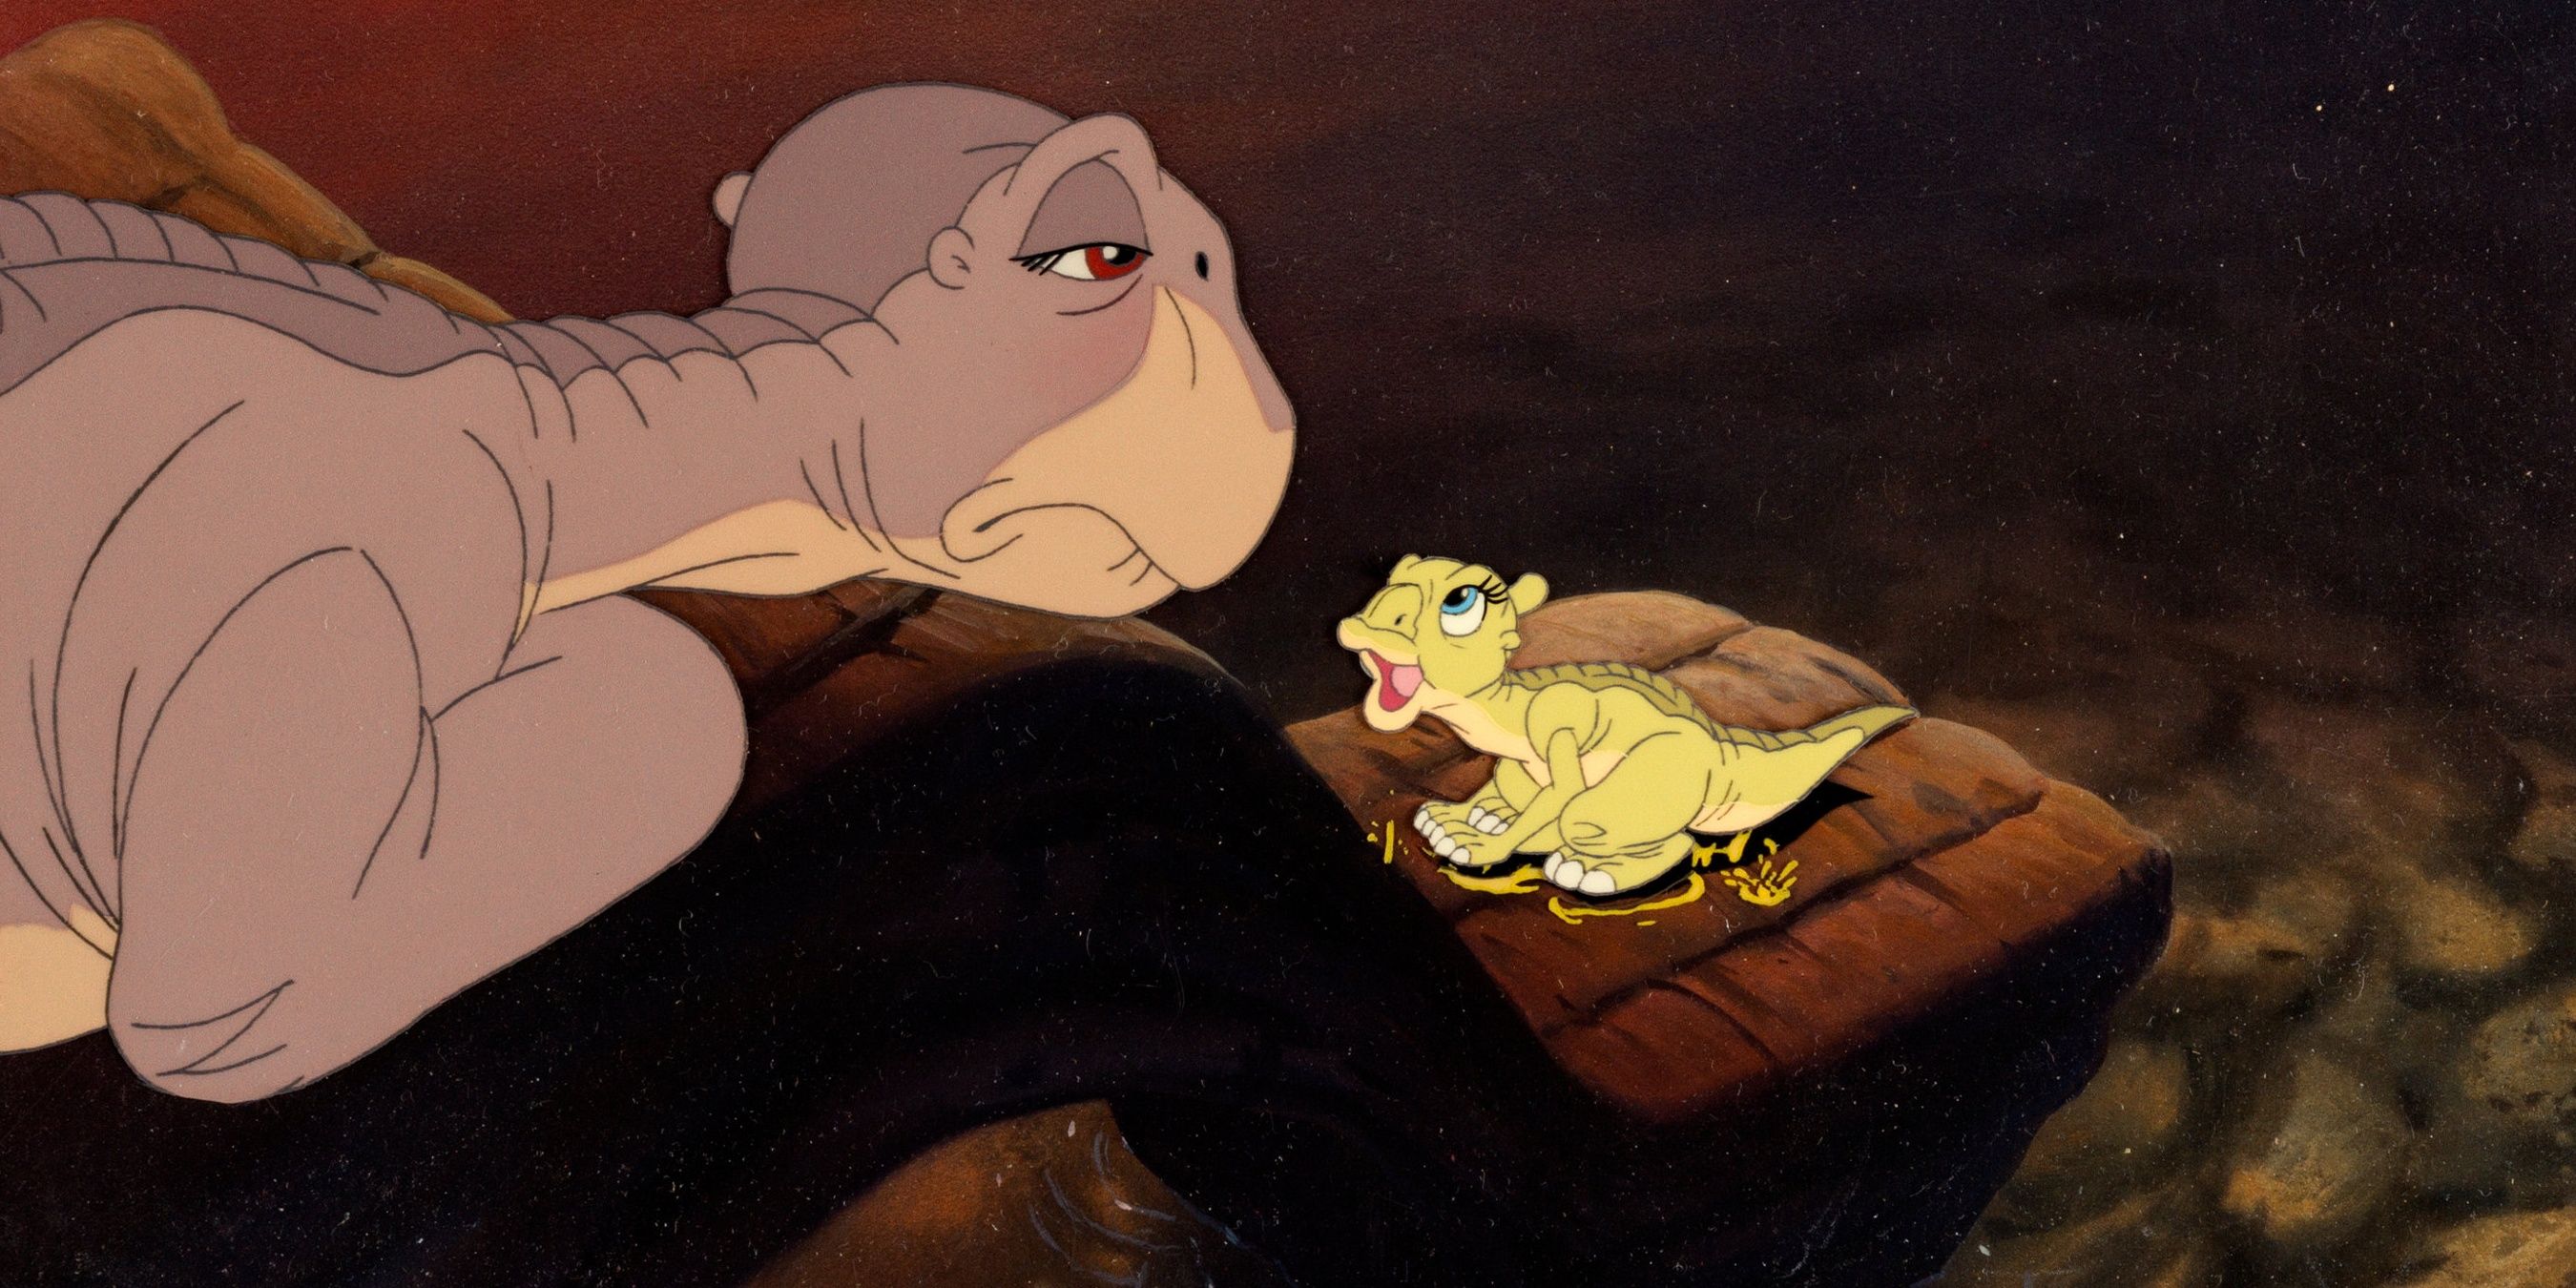 Ducky talking to a sad Littlefoot on the Land ahead of time.